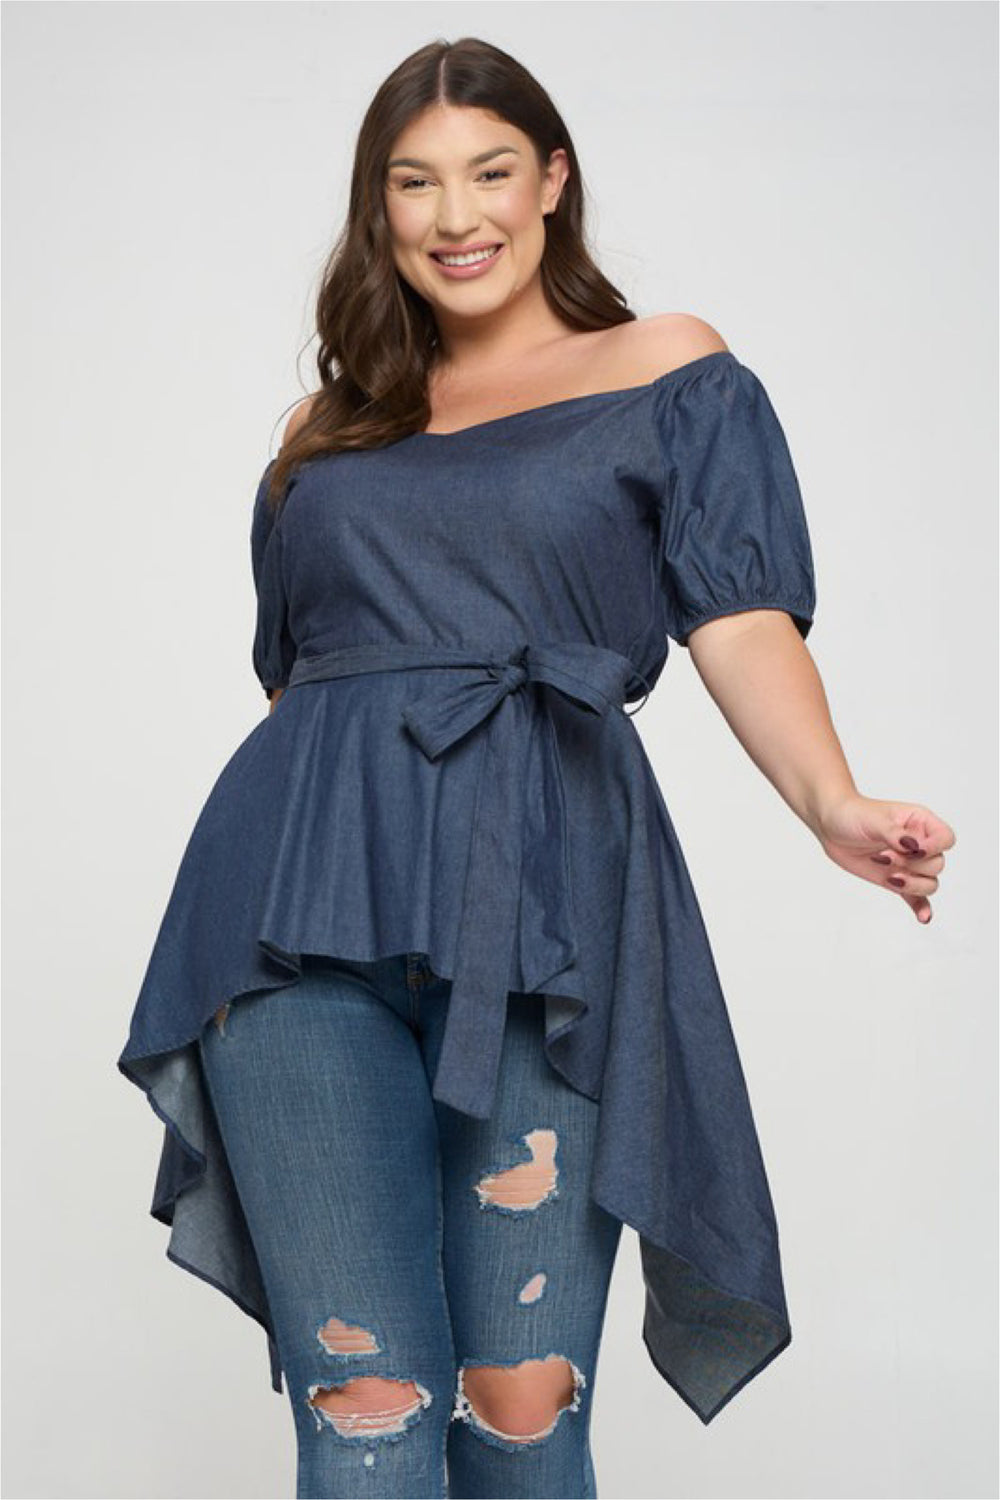 Thread & Supply Denim Peplum Shirt (Extended Sizes Available) at